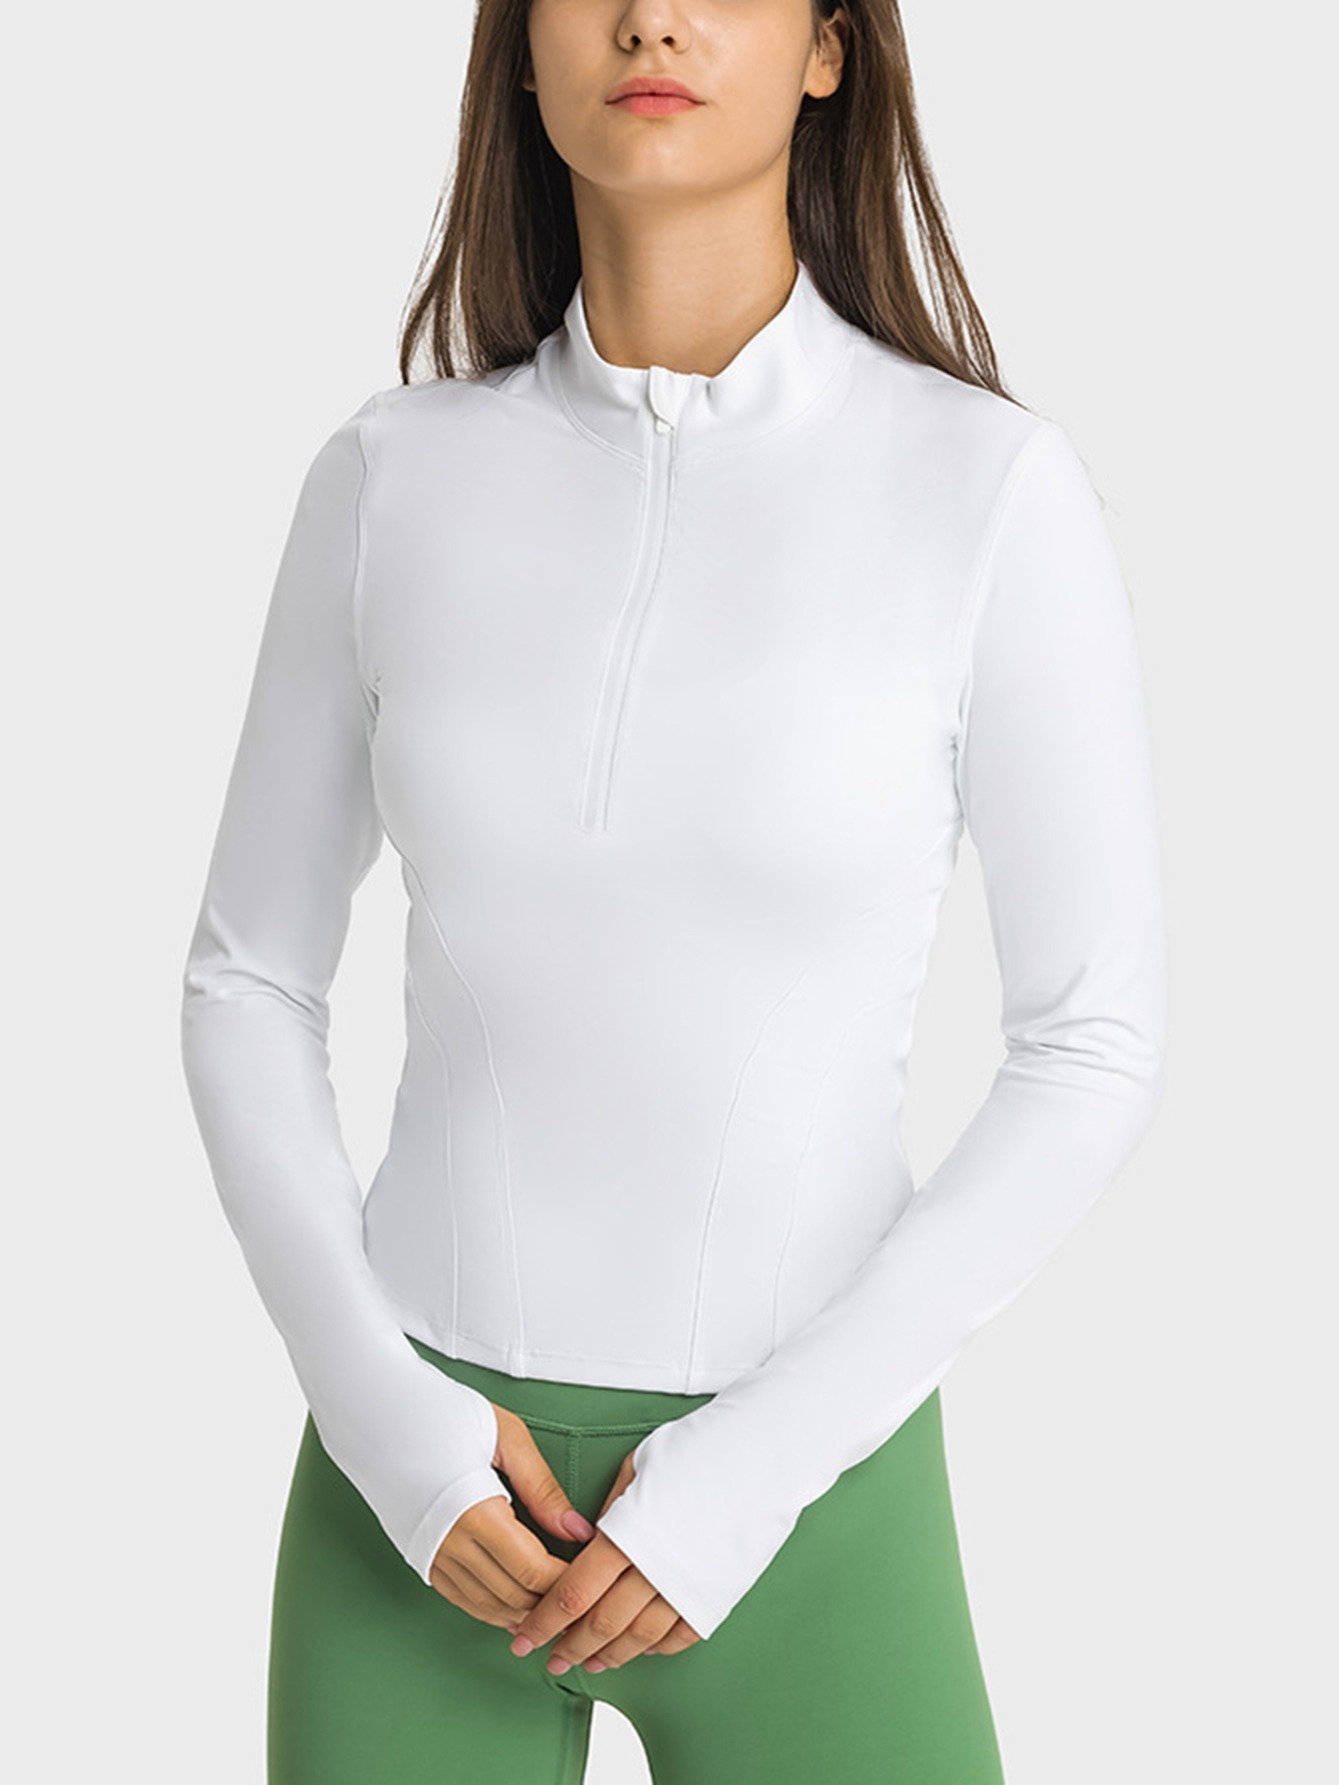 womens stand collar top